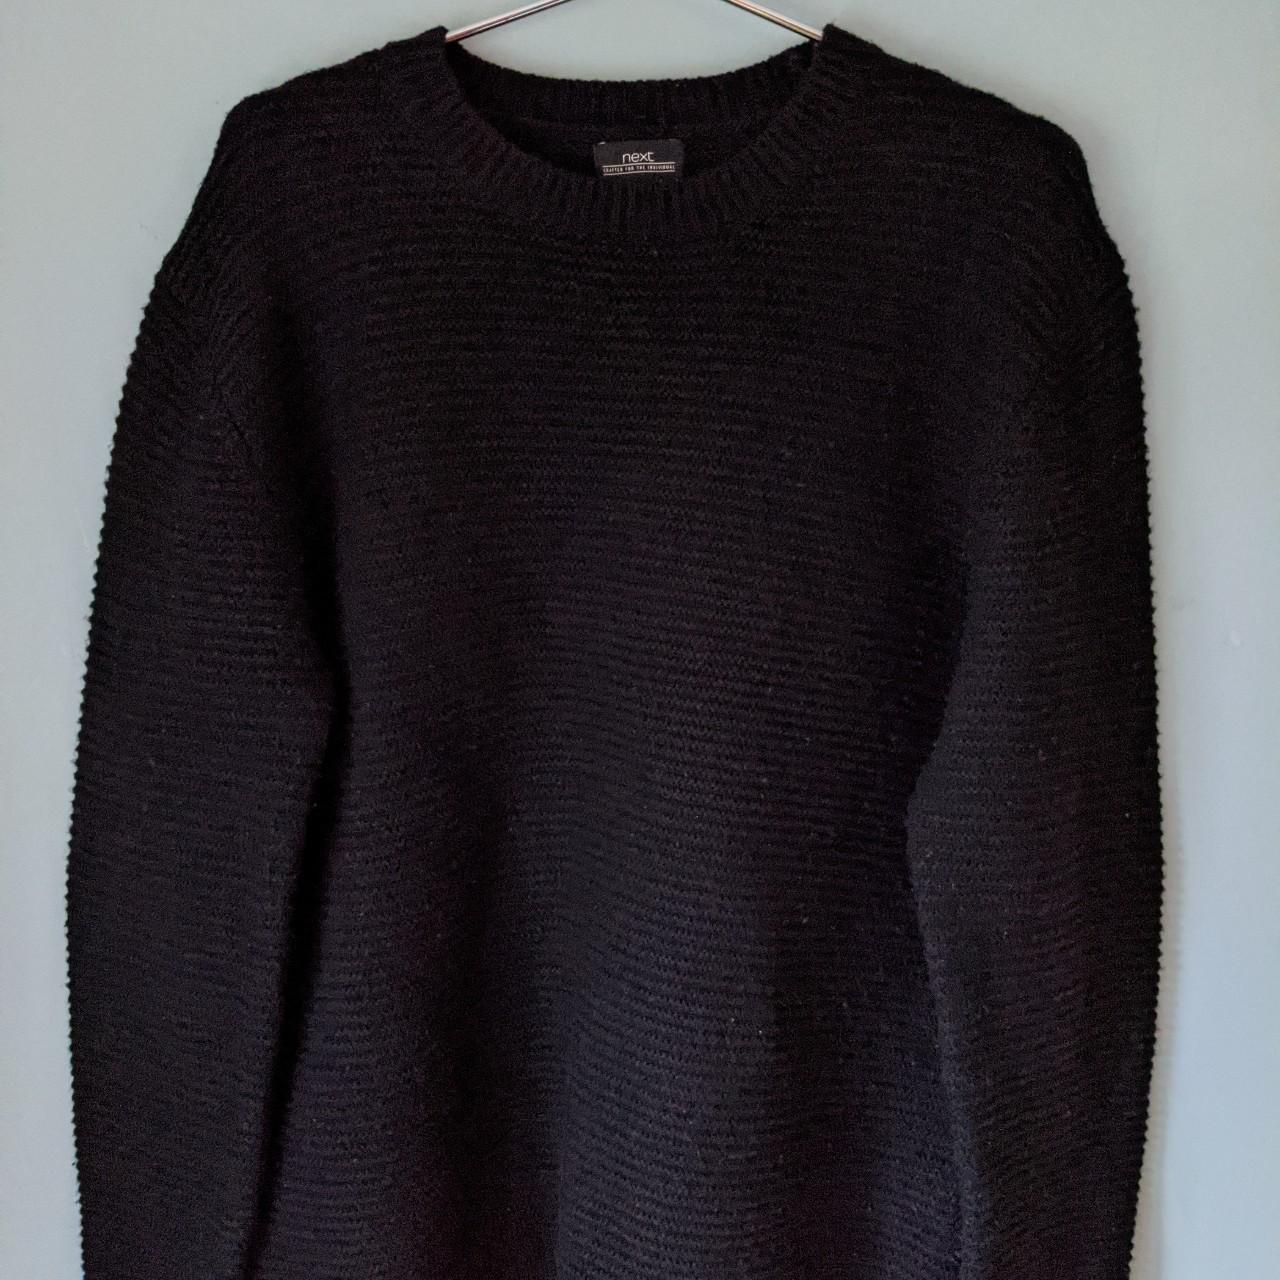 Black Next woolly jumper, very warm, perfect for... - Depop